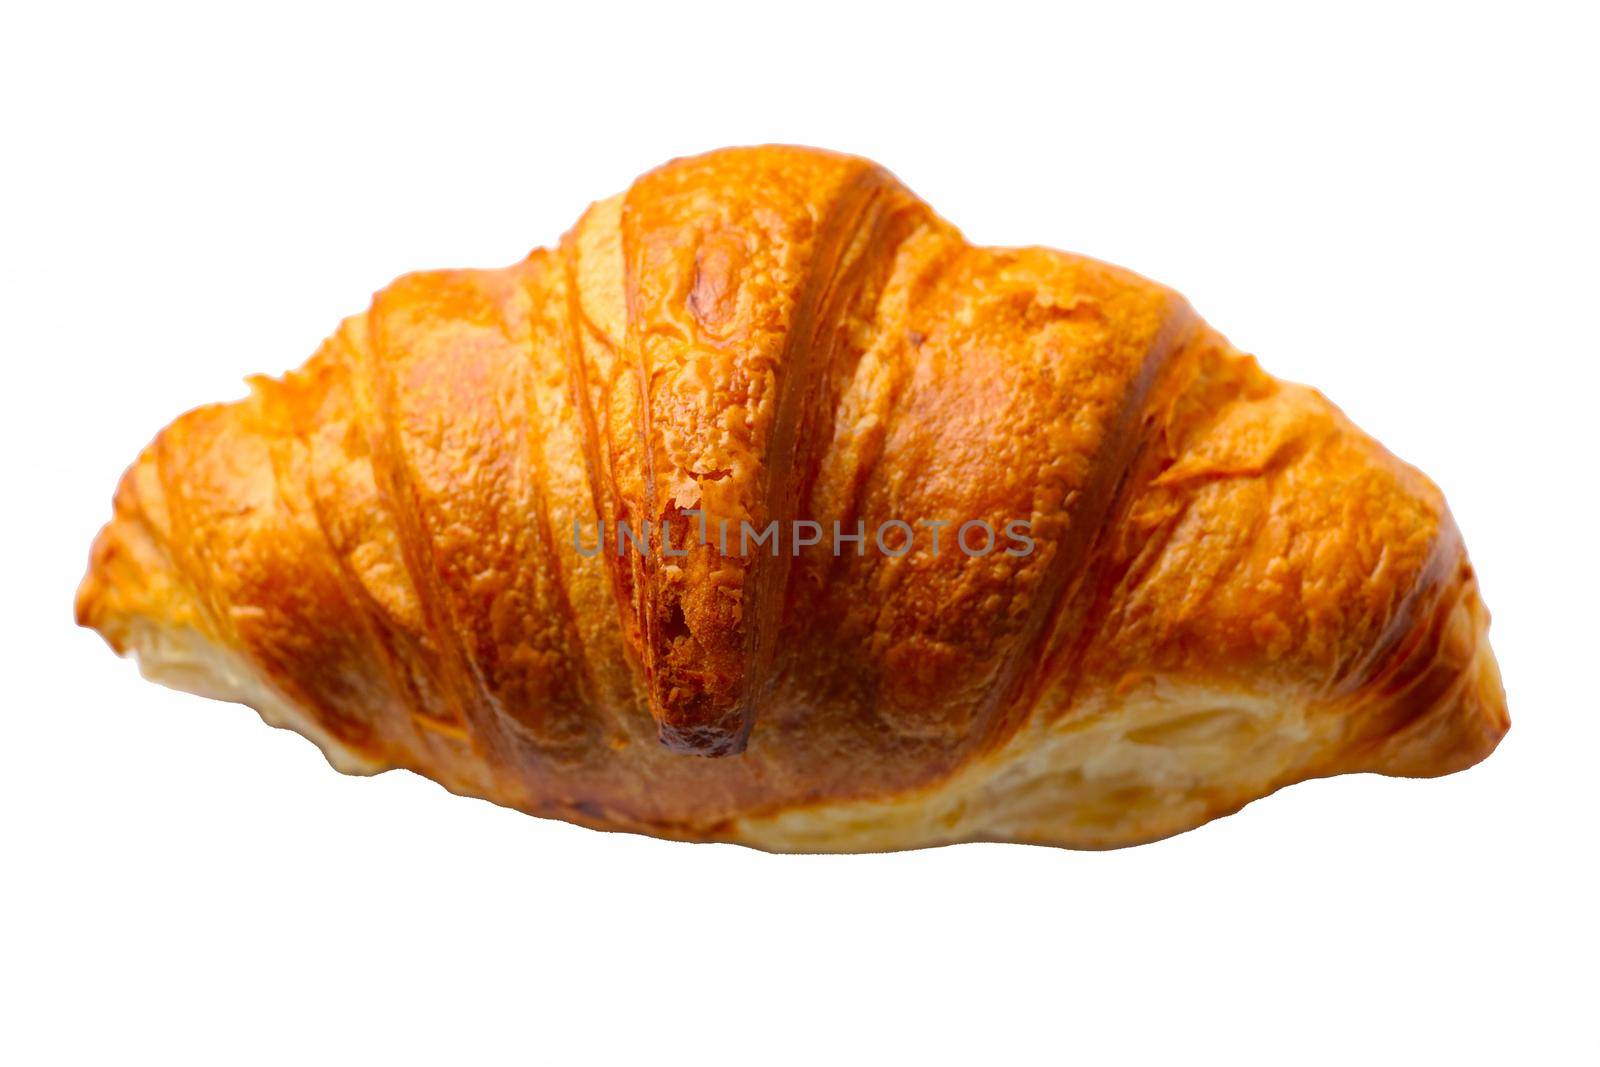 On a white background is a delicious hot croissant